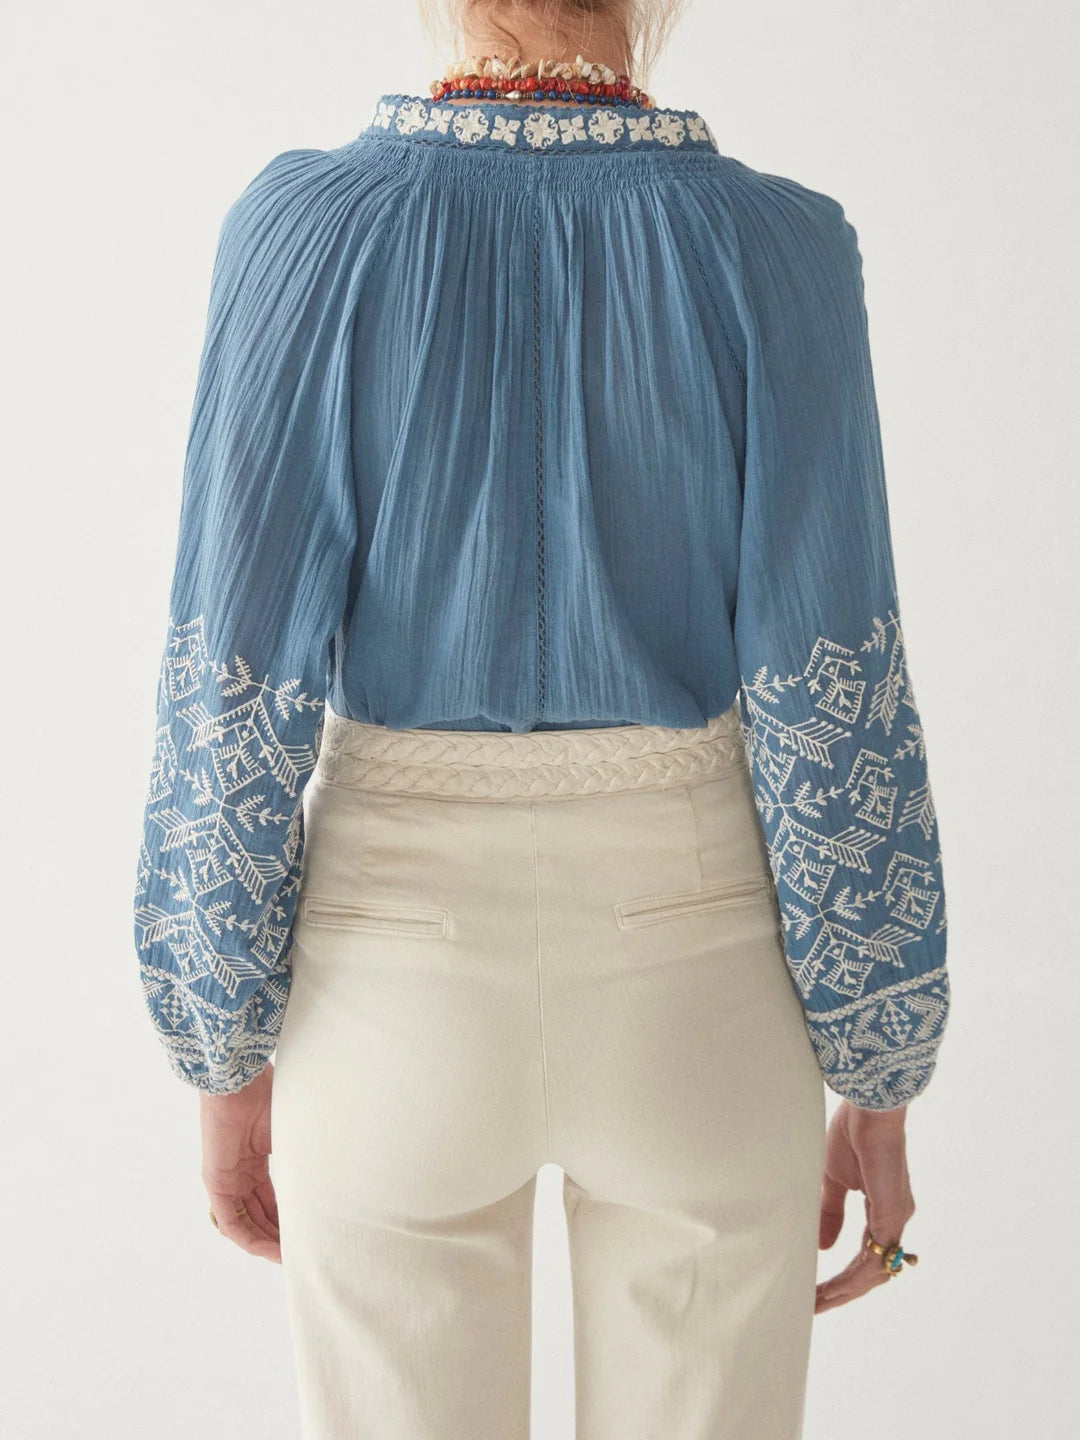 A woman from behind wearing a Sandrine Cotton Blouse in French Blue by Maison Hotel with floral embroidery and lace sleeve details and cream trousers.